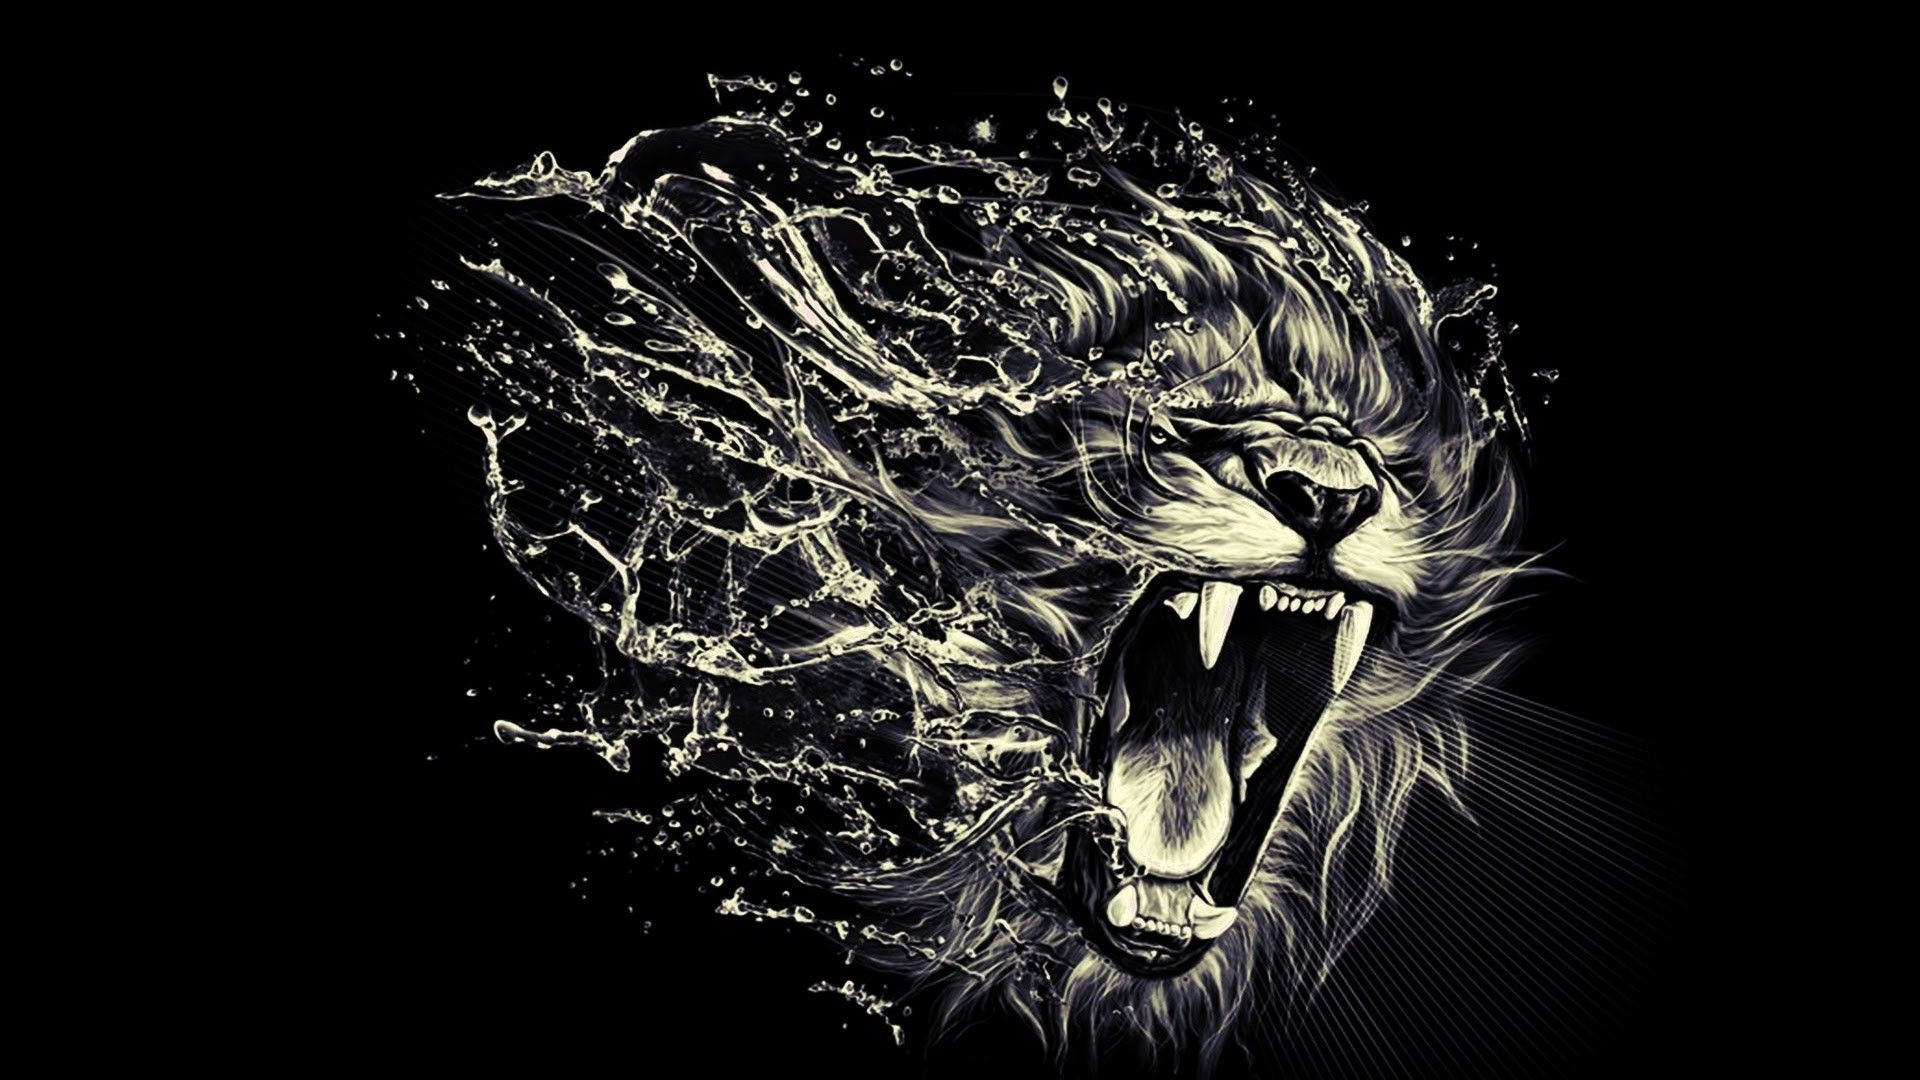 100,000 The rest of the lion Vector Images | Depositphotos